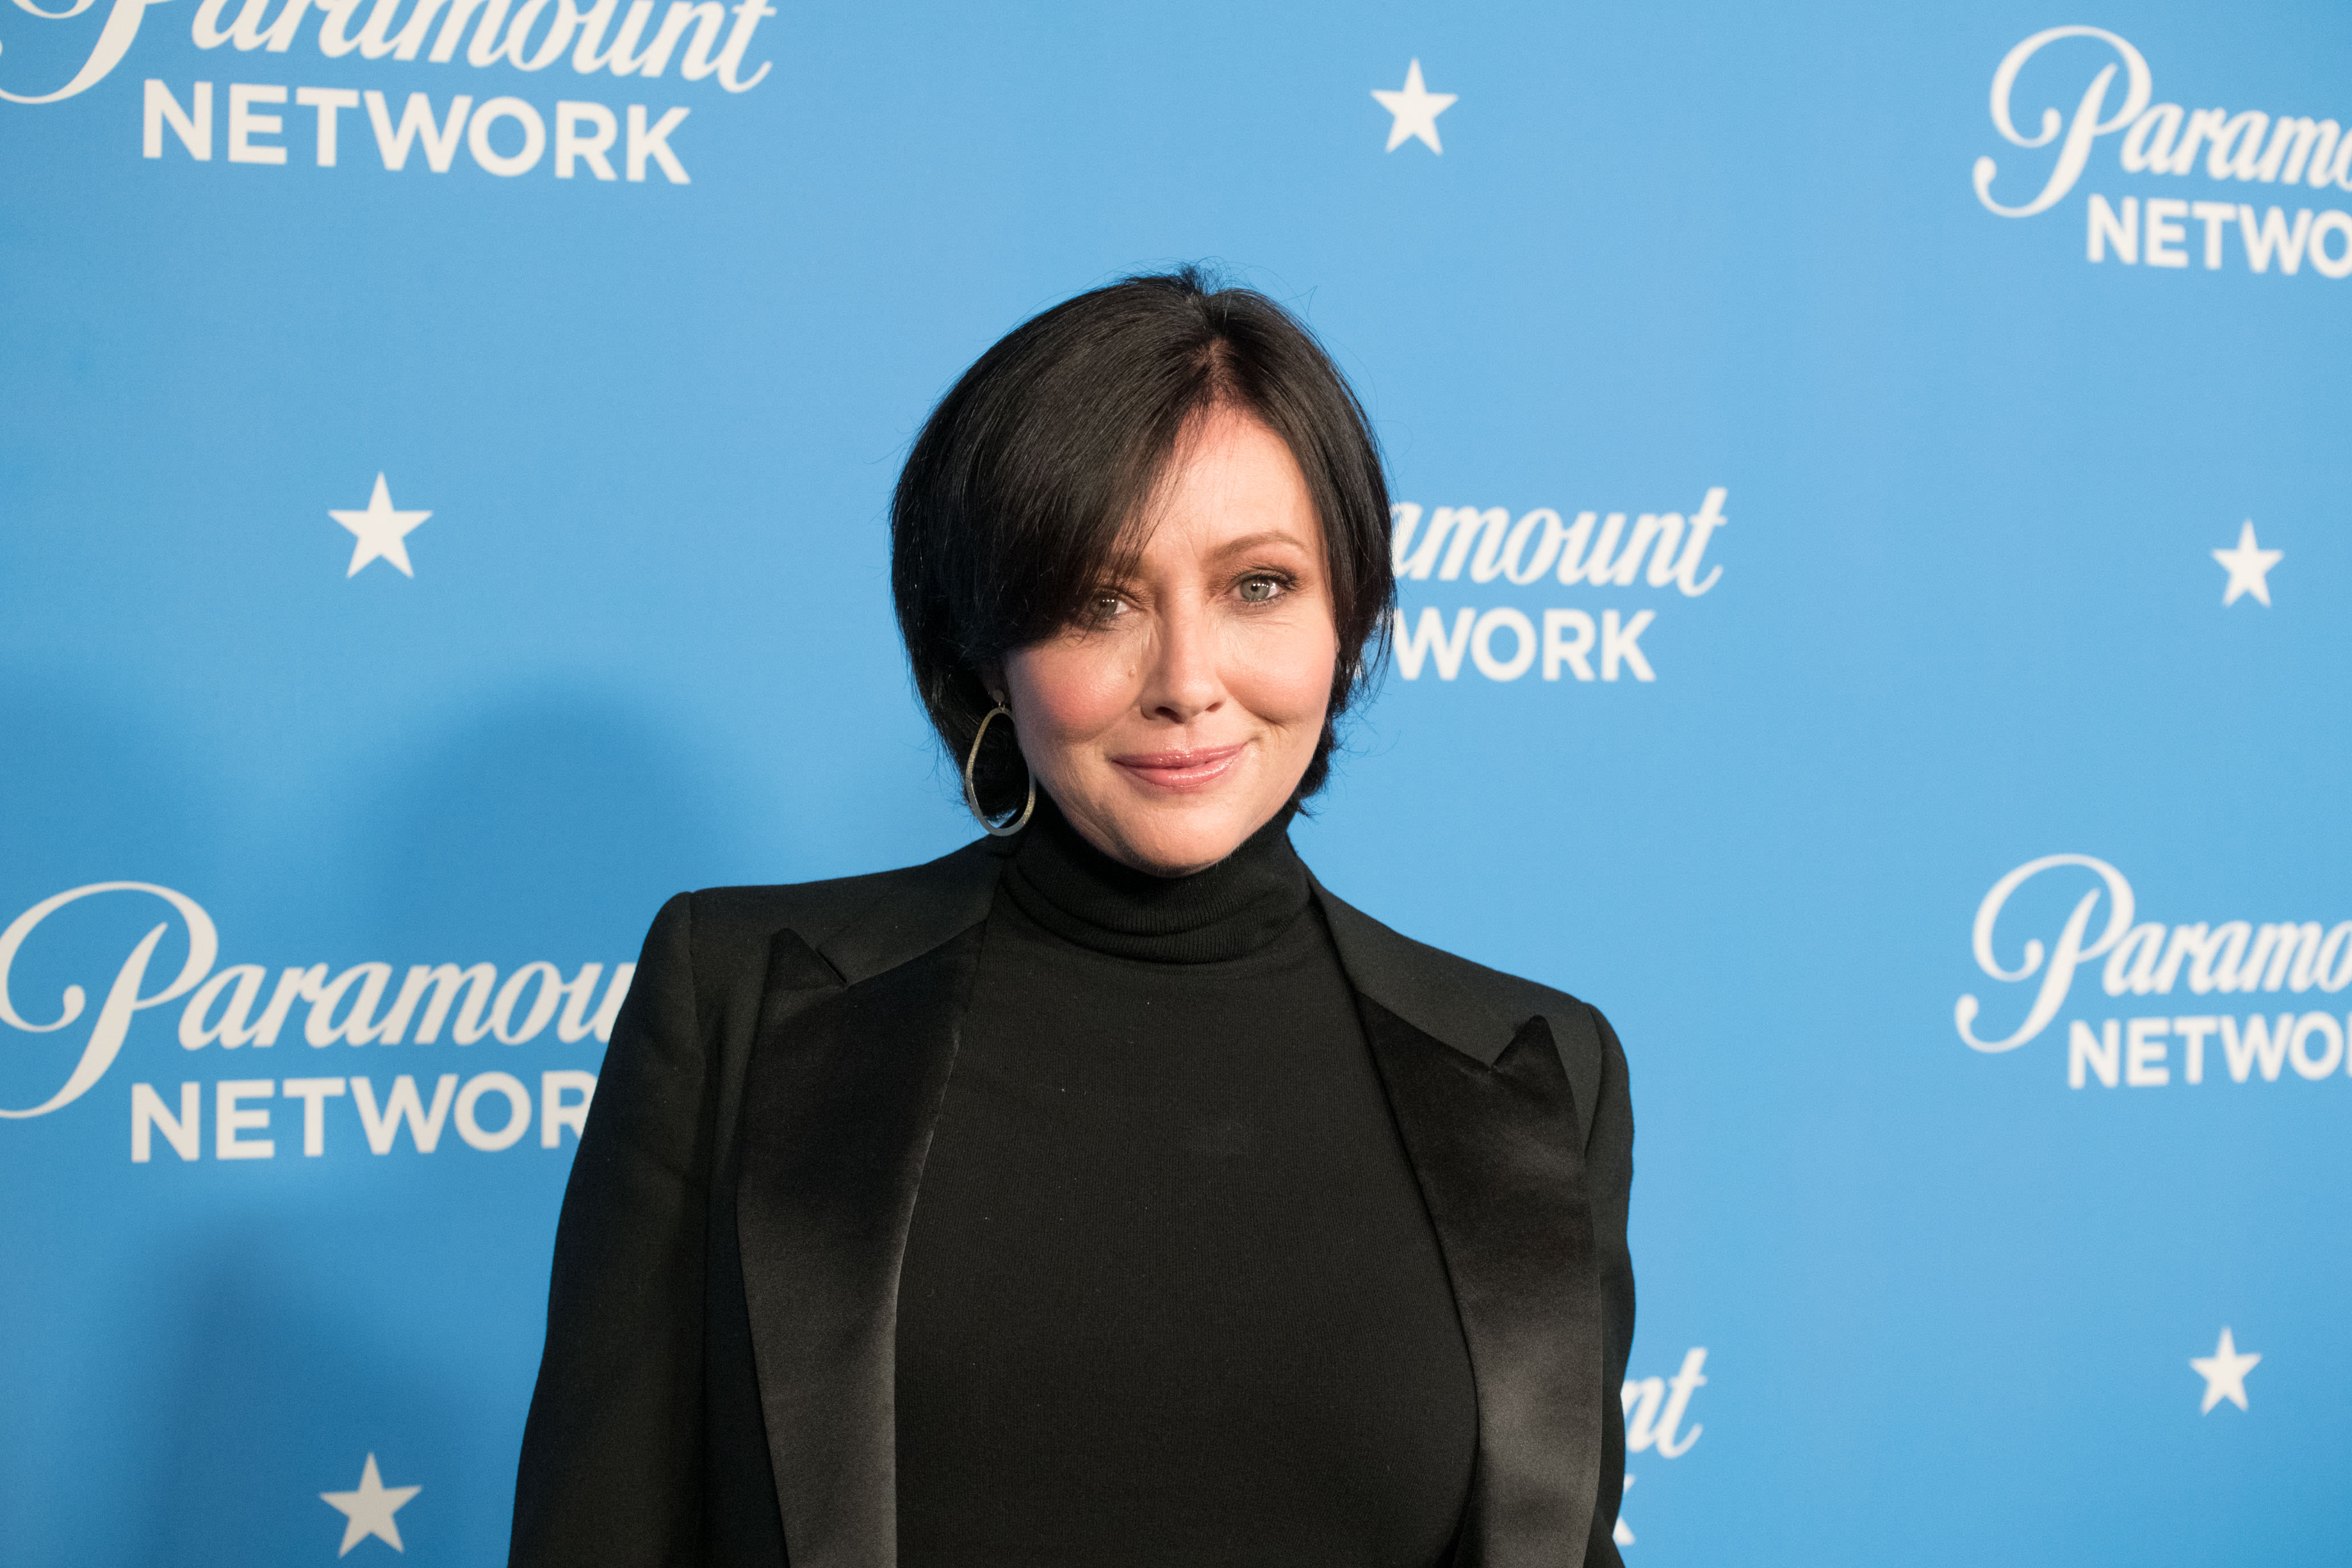 Shannen Doherty Was Feeling “Hopeful” Ahead of New Round of Chemo in Last Health Update Before Her Death